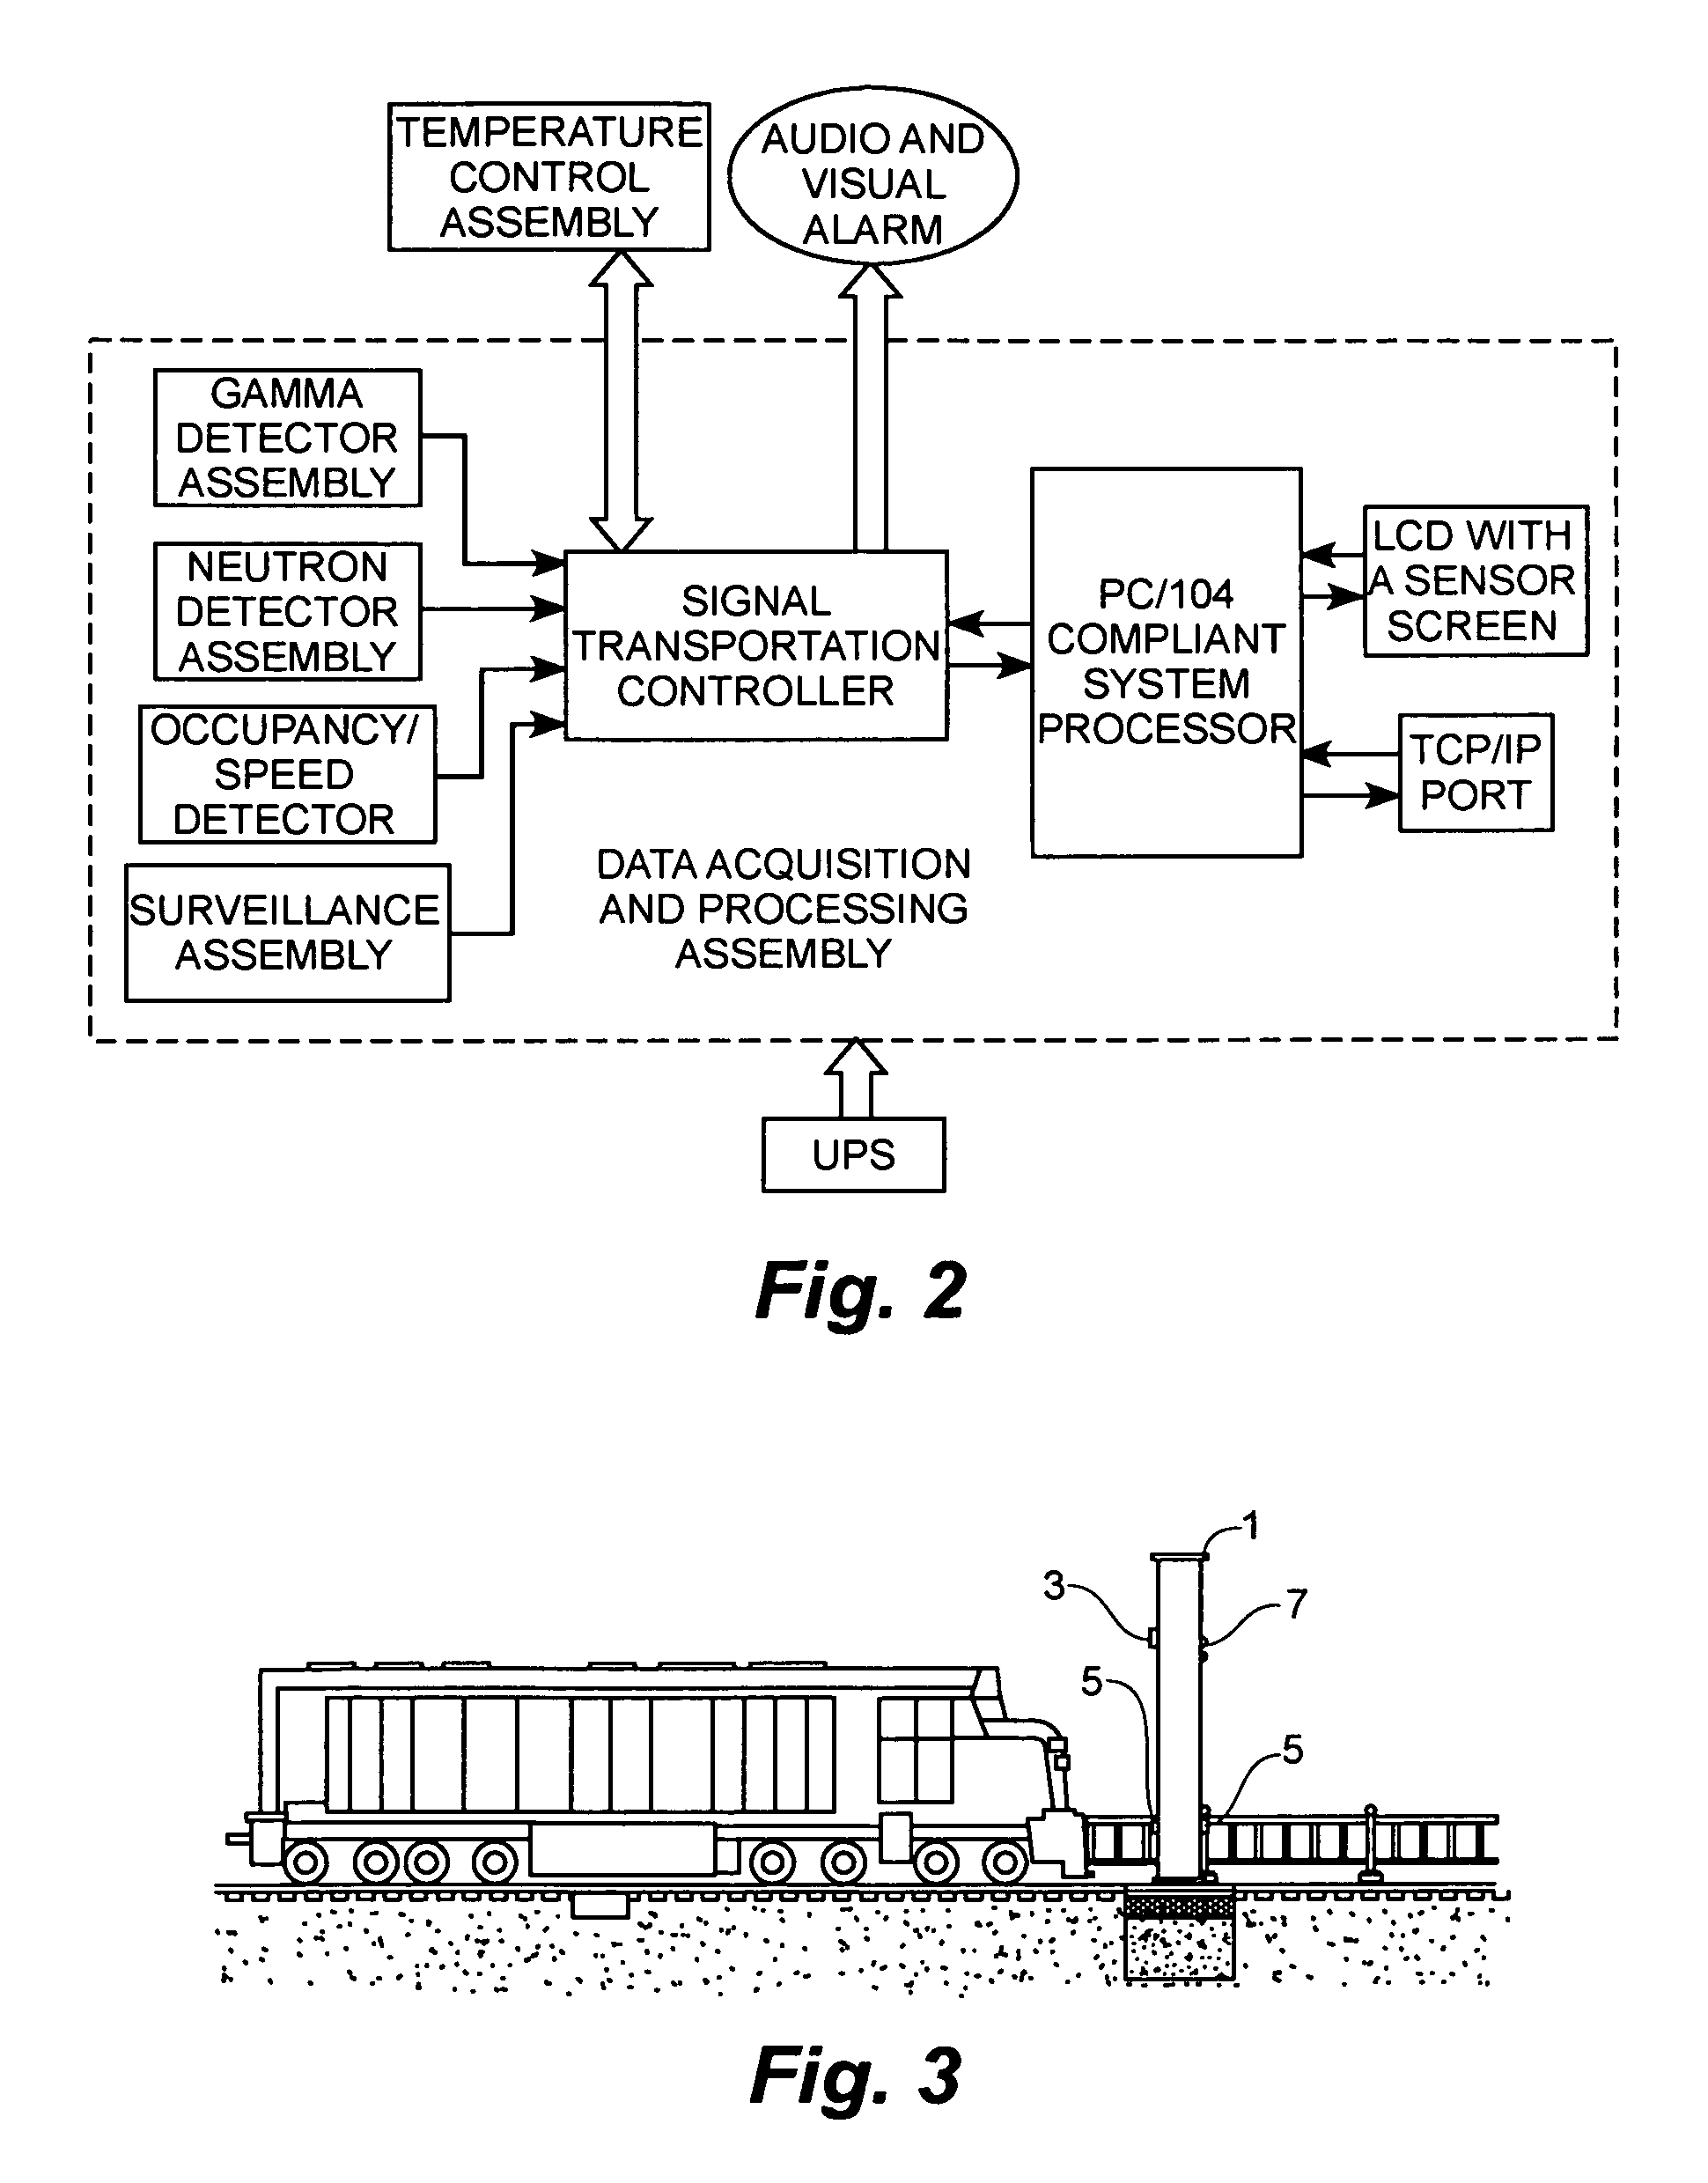 Method and device for monitoring position of radioactive materials in vehicles